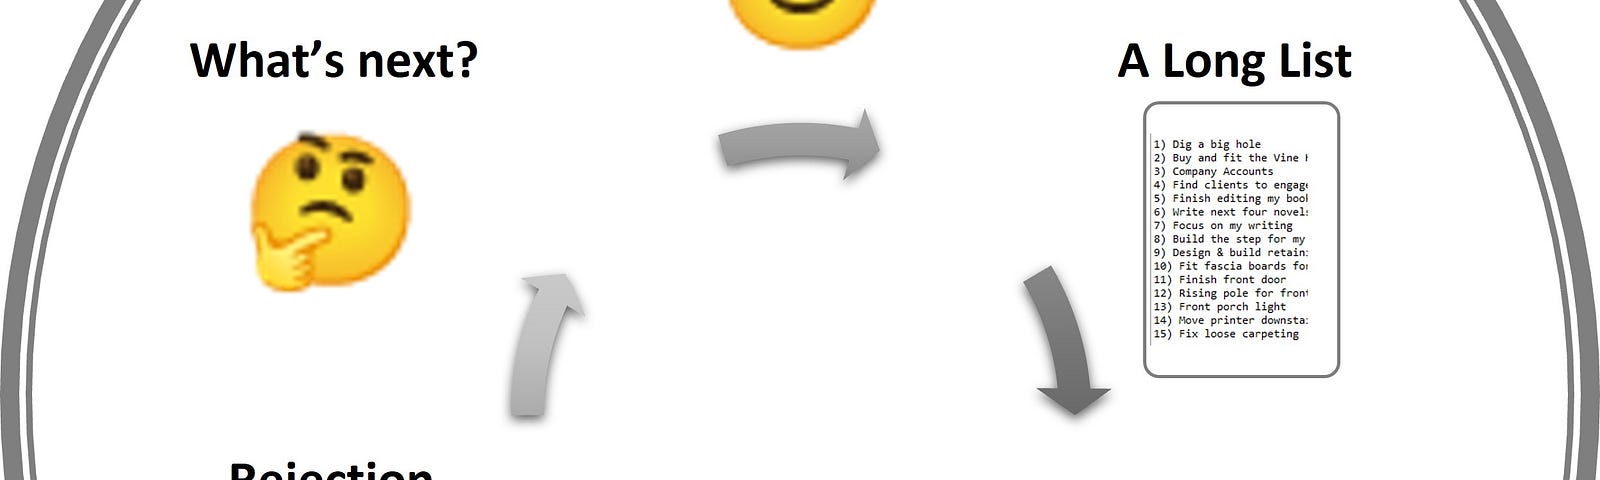 An image I created with an Angel emoji for Autism — The Angel of Disappointment, flowing to A Long List, flowing to ADHD Waiting Mode with a clock, flowing to ADHD Procrastination with a check list where ‘Last Possible Second’ is ticked, flowing to Rejection Sensitivity Dysphoria and a sad emoji, flows to ‘What’s Next?’ with a thinking emoji.